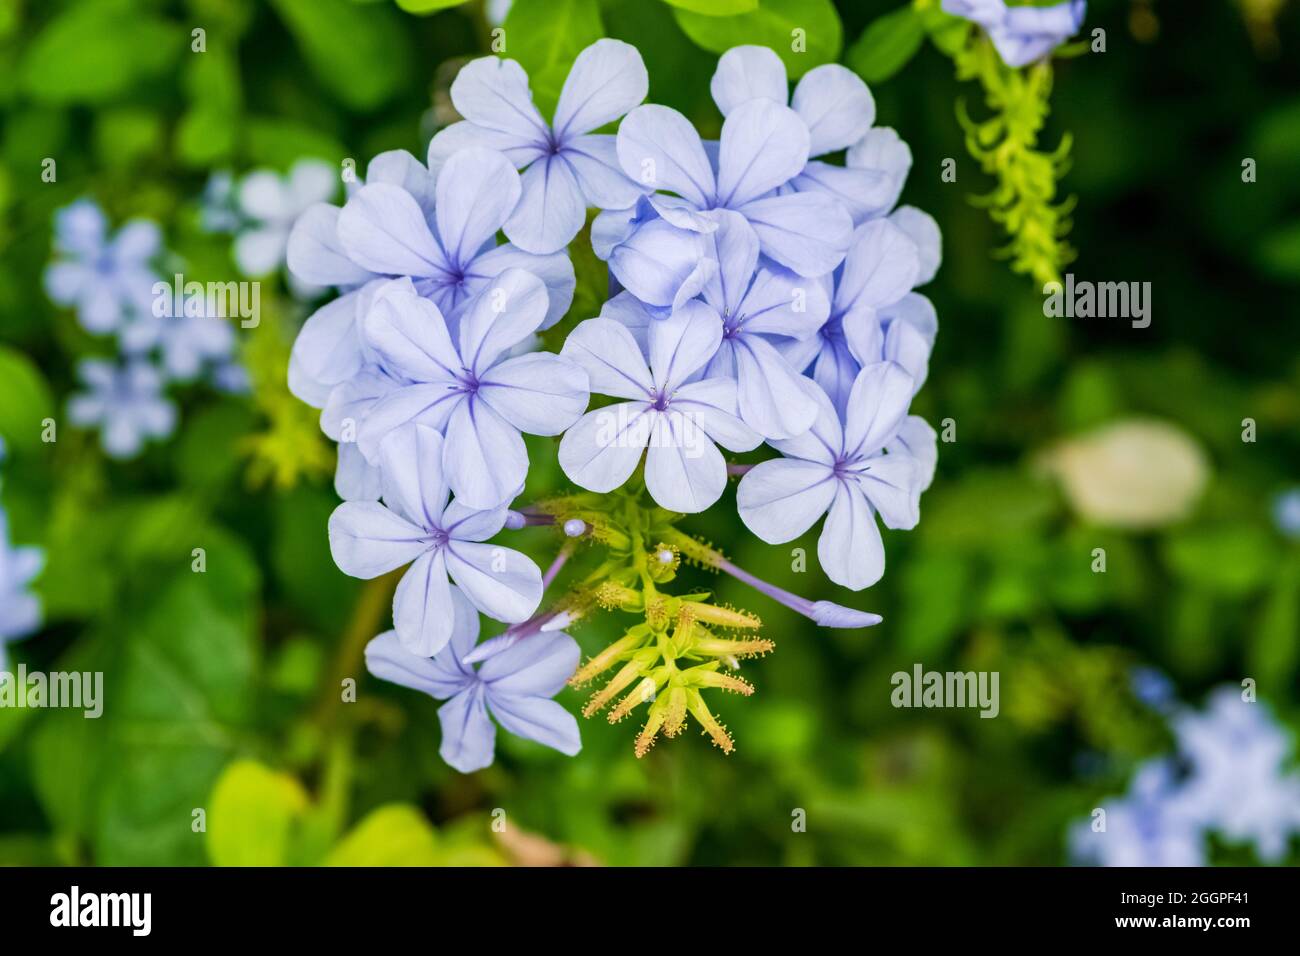 Closeup of a beautiful Cape plumbago plant with its characteristic flowers. Note the incredible purple color of the petals. Stock Photo